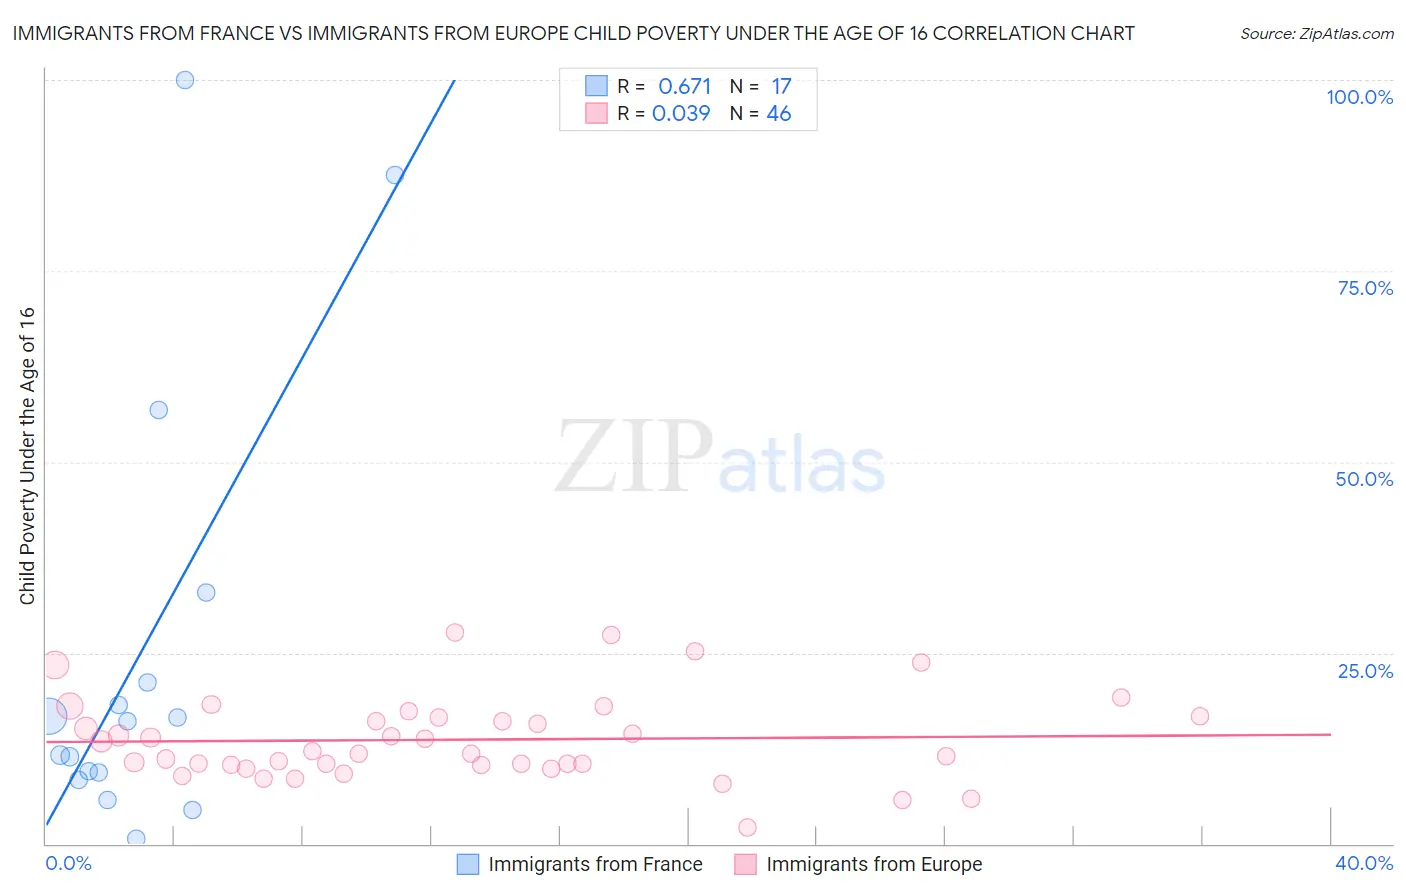 Immigrants from France vs Immigrants from Europe Child Poverty Under the Age of 16